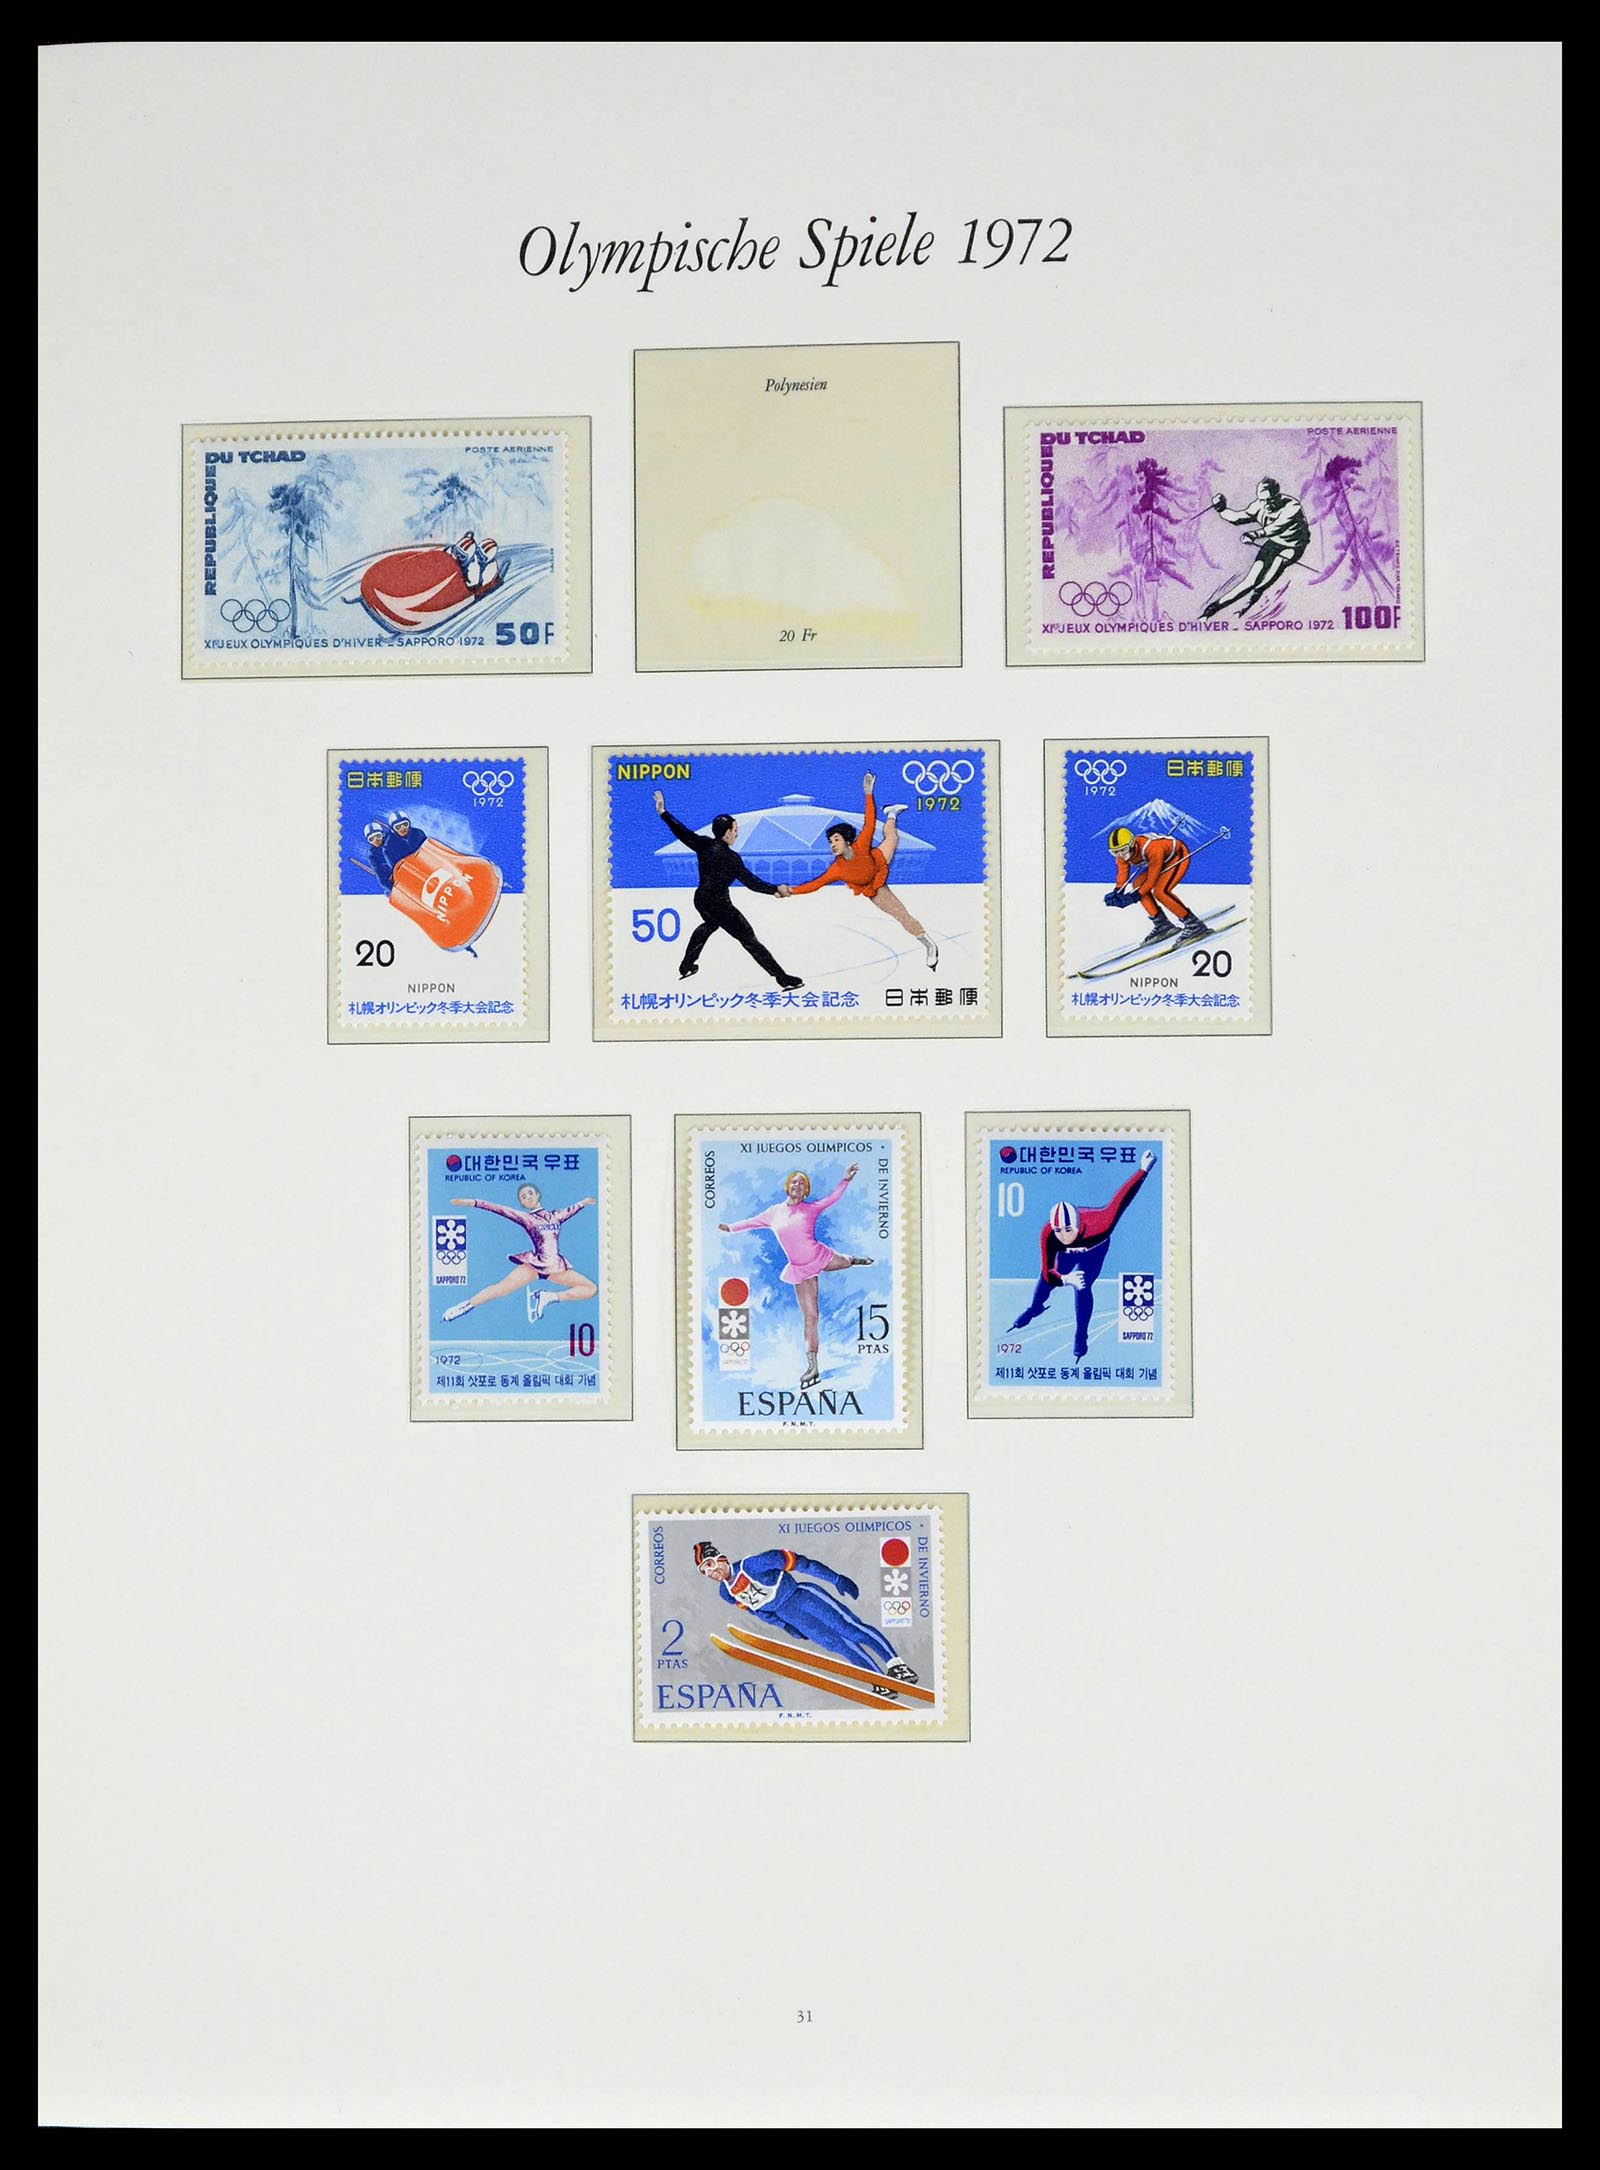 39237 0089 - Stamp collection 39237 Olympics 1972.